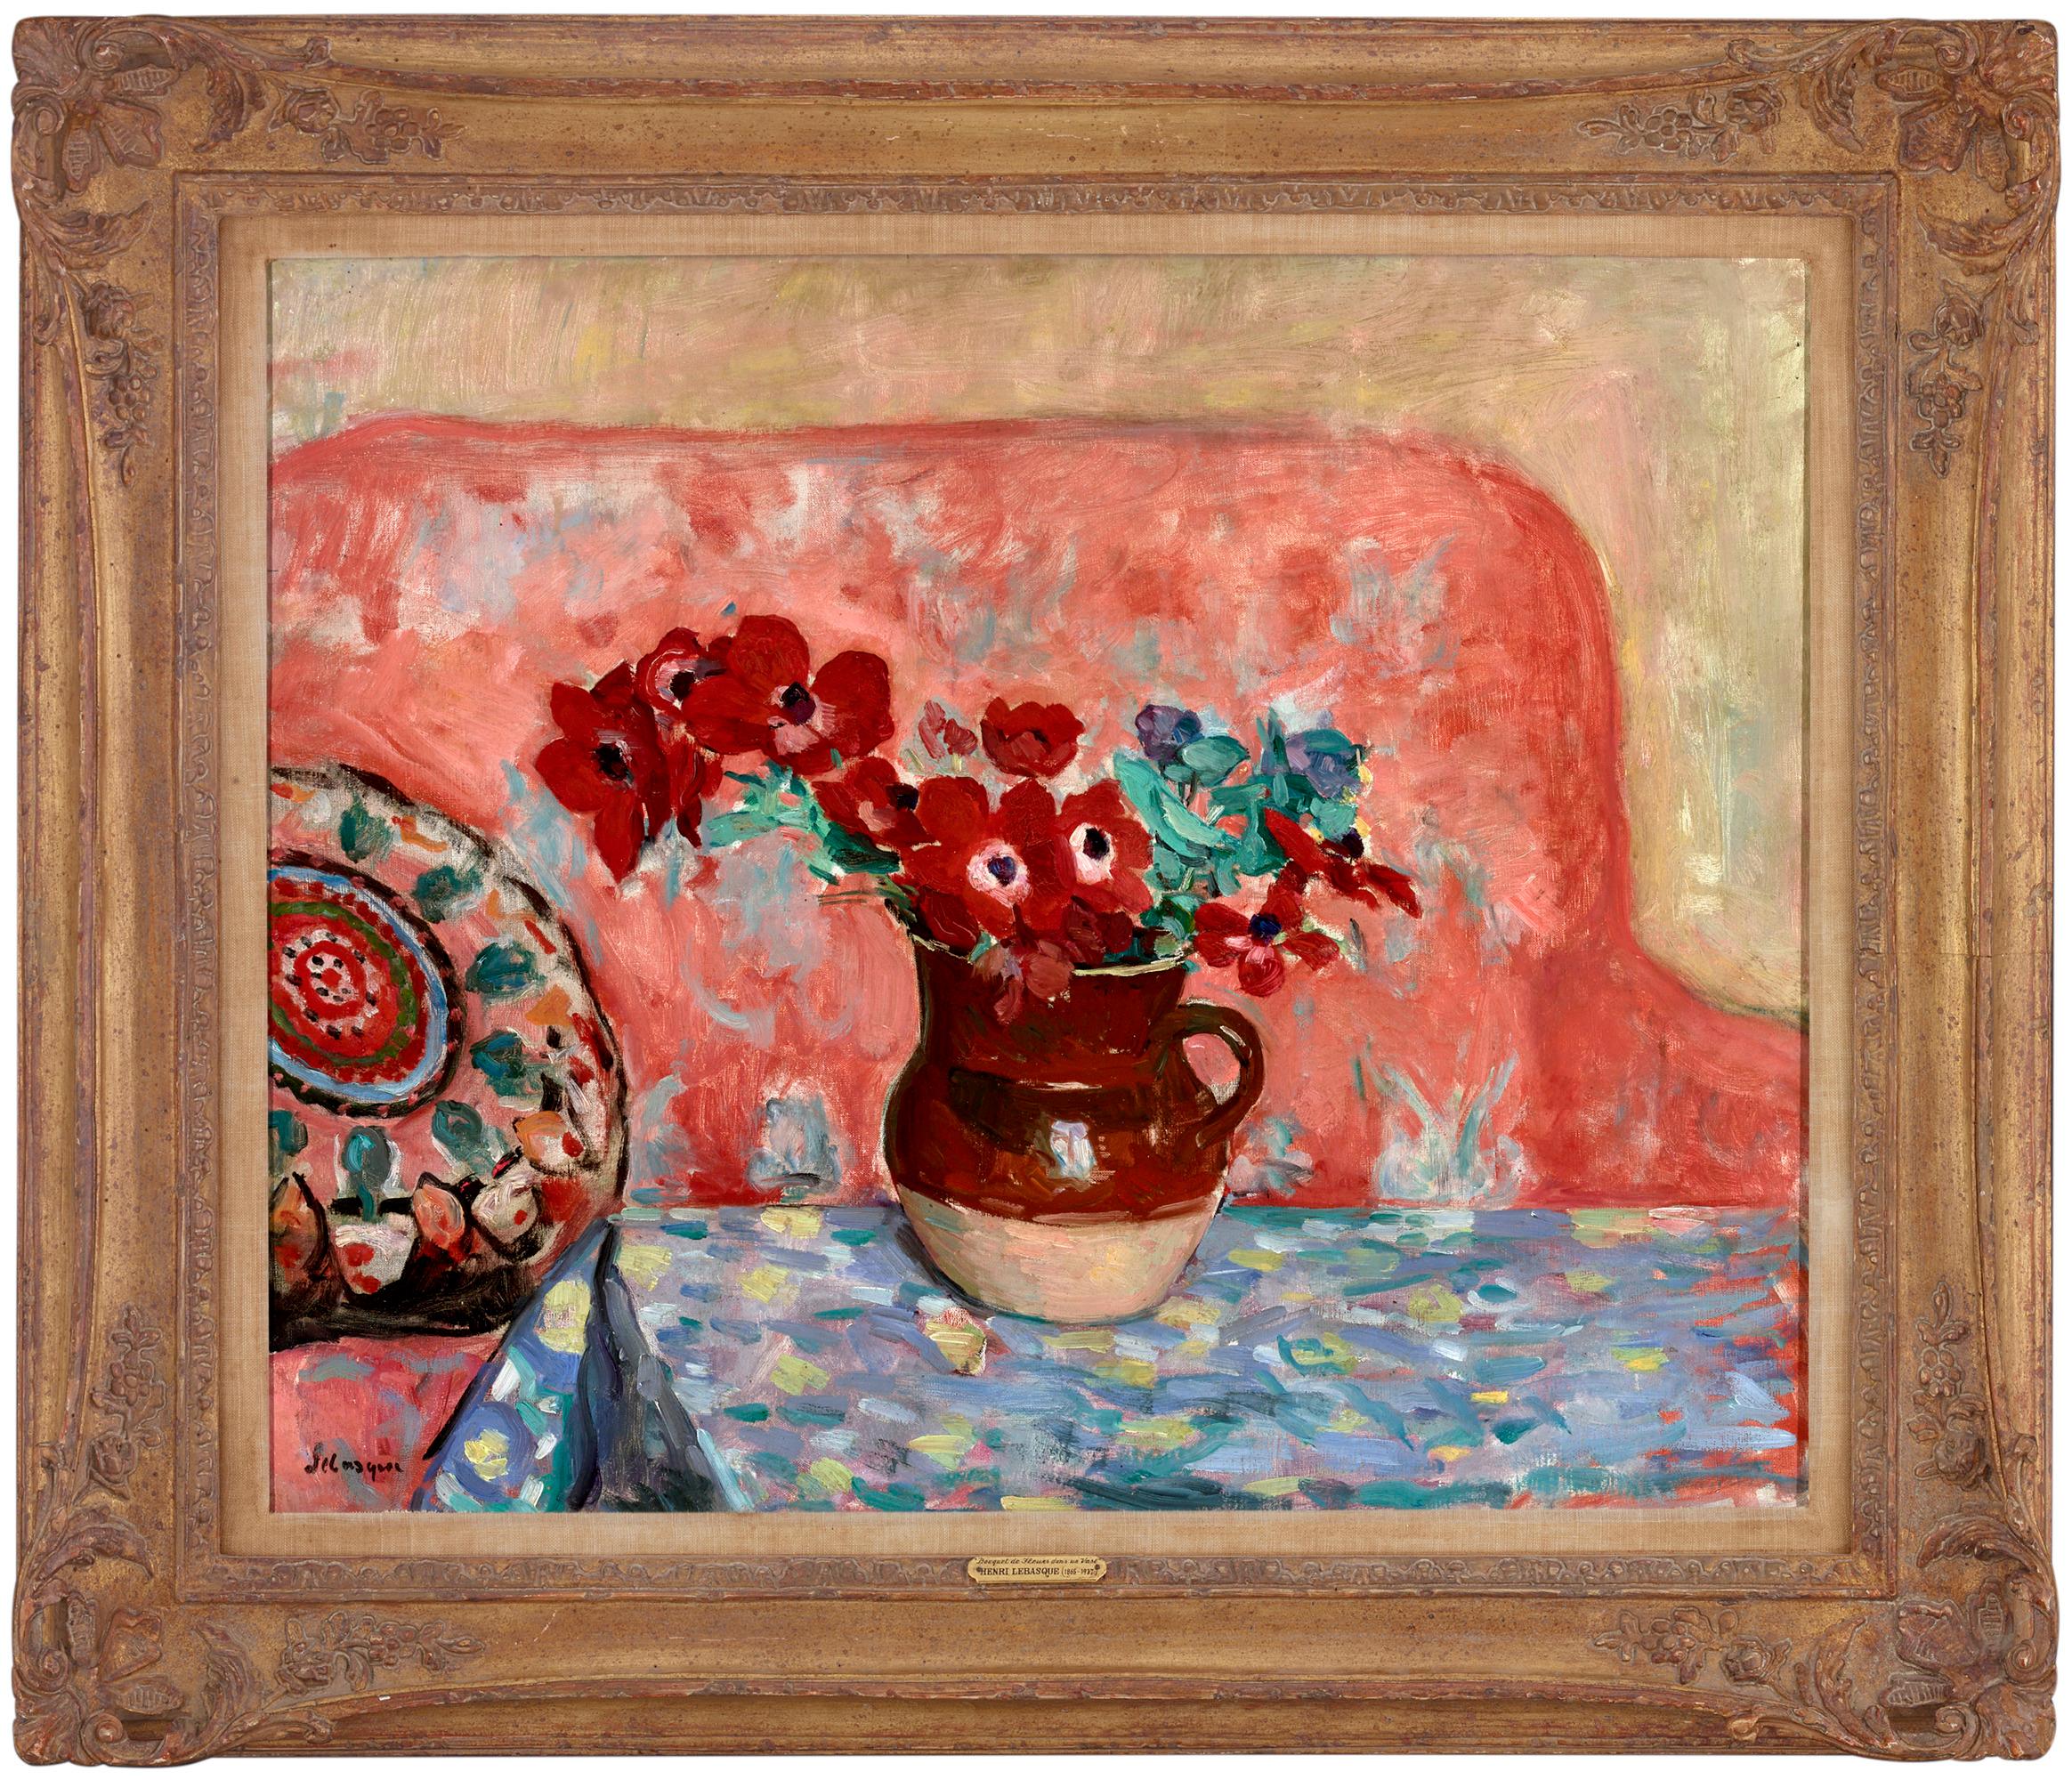 Pichet d'anemones (Pitcher of Anemones) - Painting by Henri Lebasque